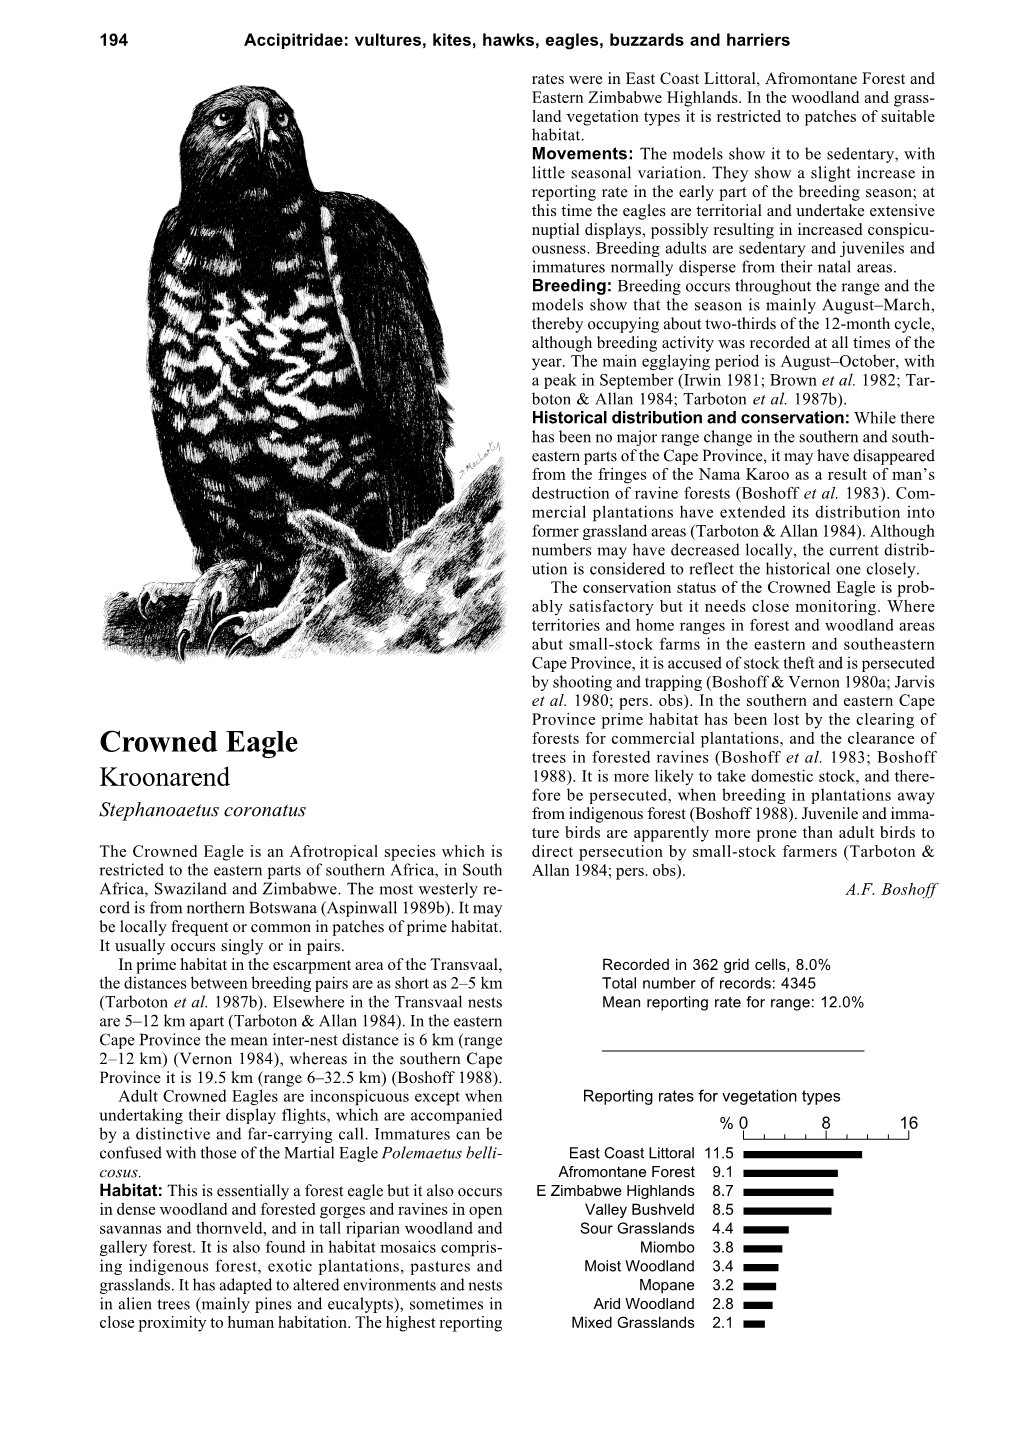 Crowned Eagle Is Prob- Ably Satisfactory but It Needs Close Monitoring